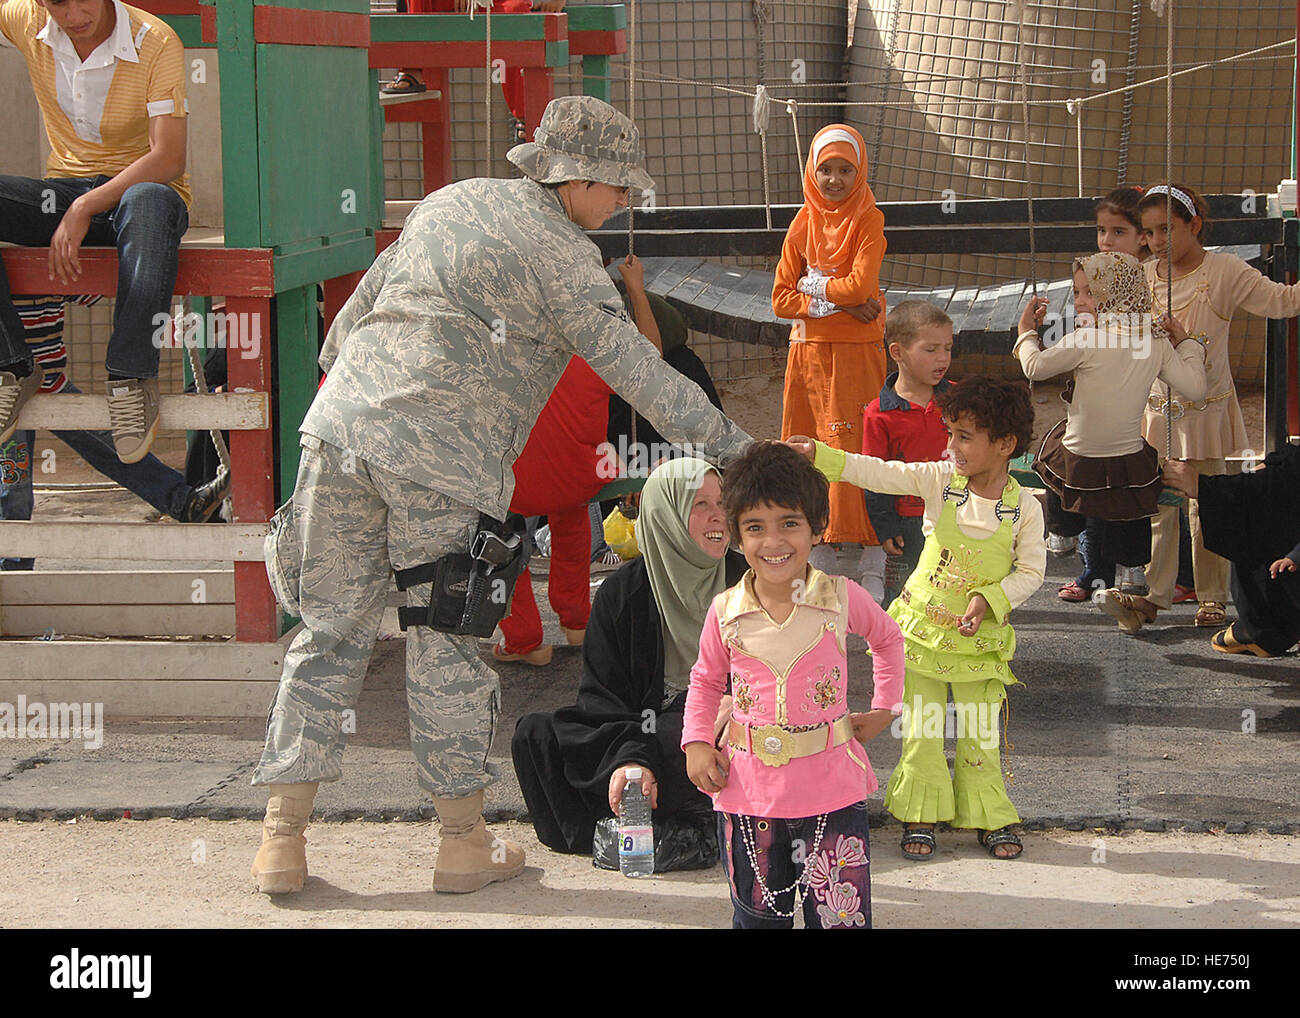 A U.S. Air Force security forces member from the 586th Air Expeditionary Group plays with Iraqi children on Sept. 29, 2008, at Camp Bucca, Iraq, while they wait for transport to the detainee visitation center. The 586th AEG provides security and transport to the center for nearly 400 visitors who are allowed to visit daily with detainees being held at the Theater Internment Facility. Stock Photo